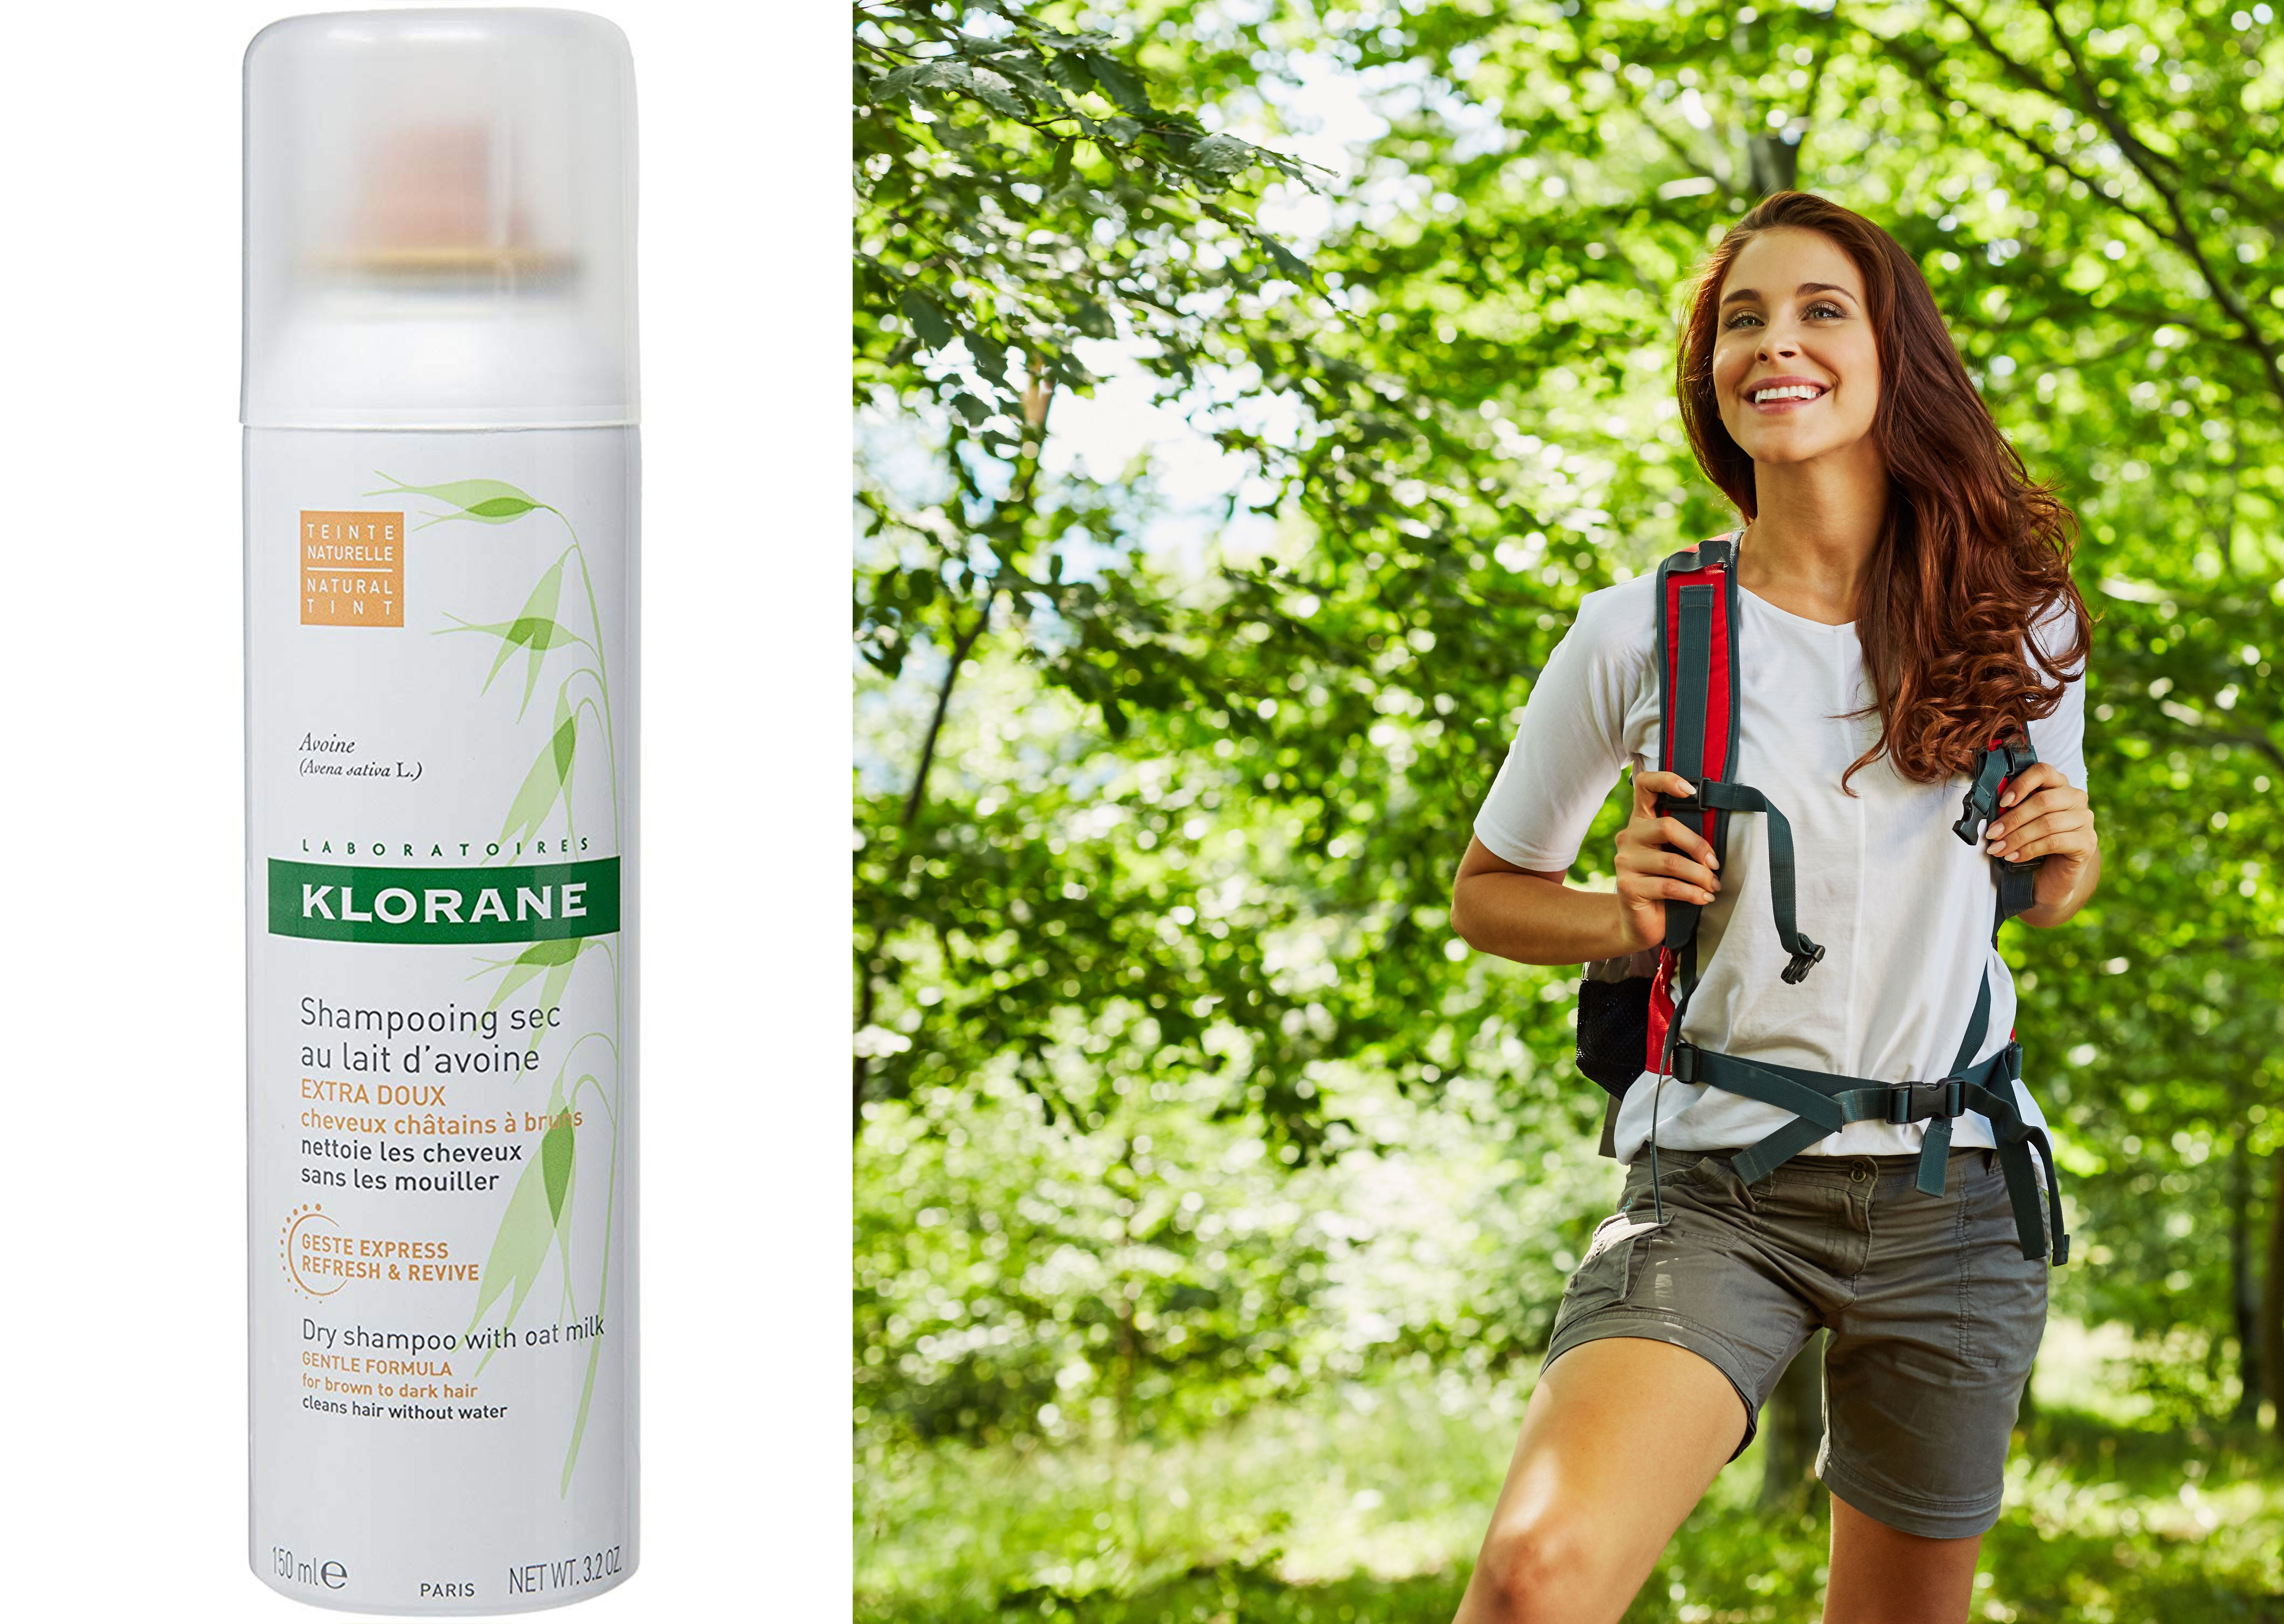 dry shampoo bottle beside woman hiker with voluminous hair outdoors